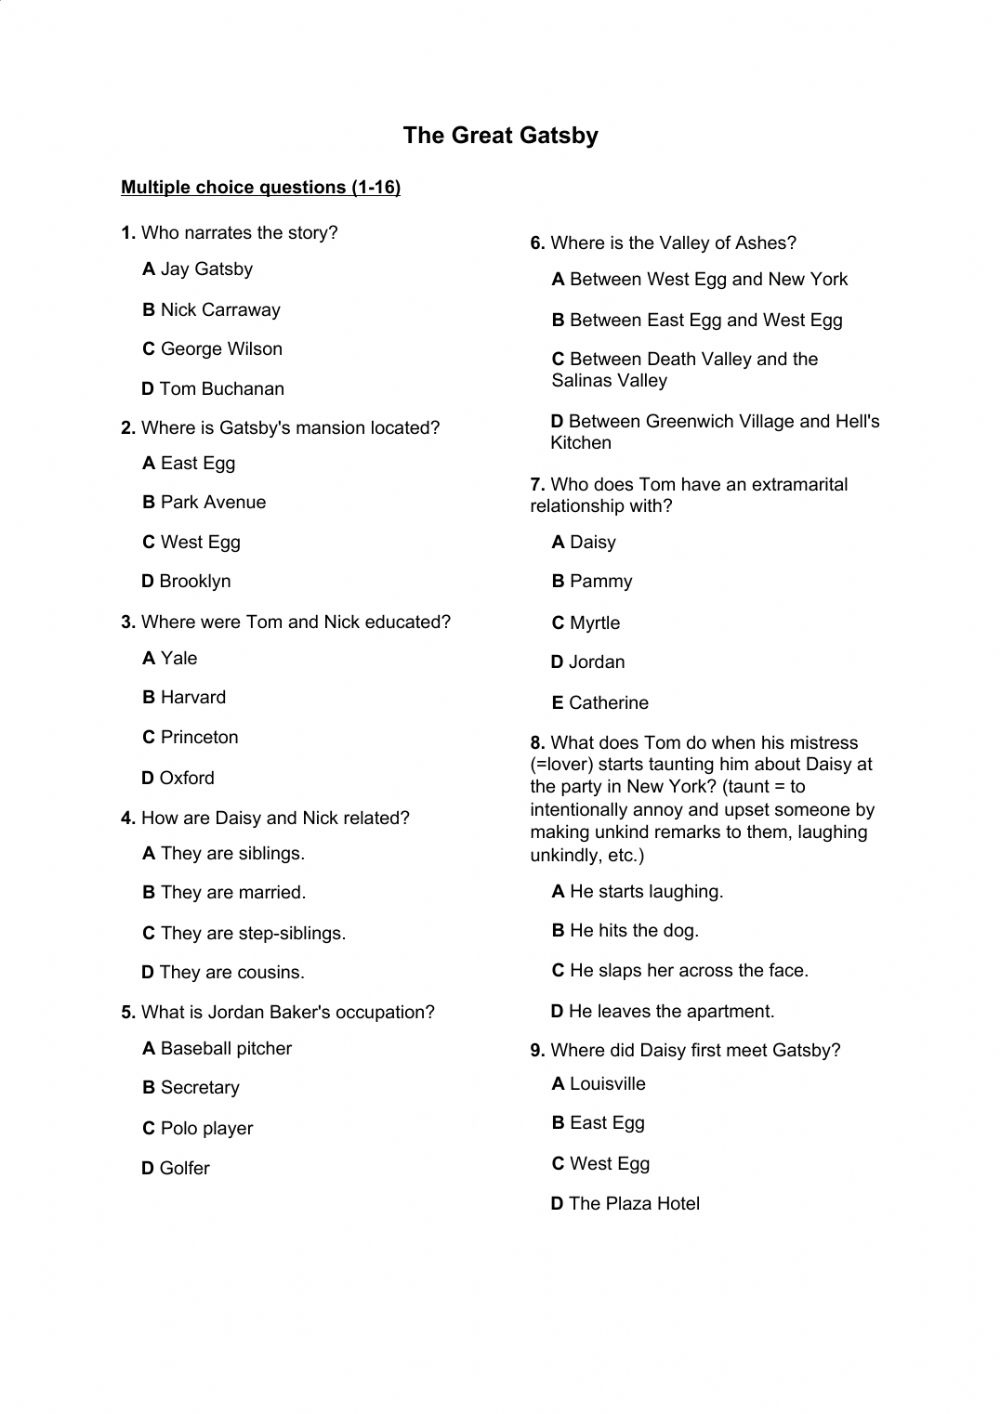 The Great Gatsby movie Worksheet